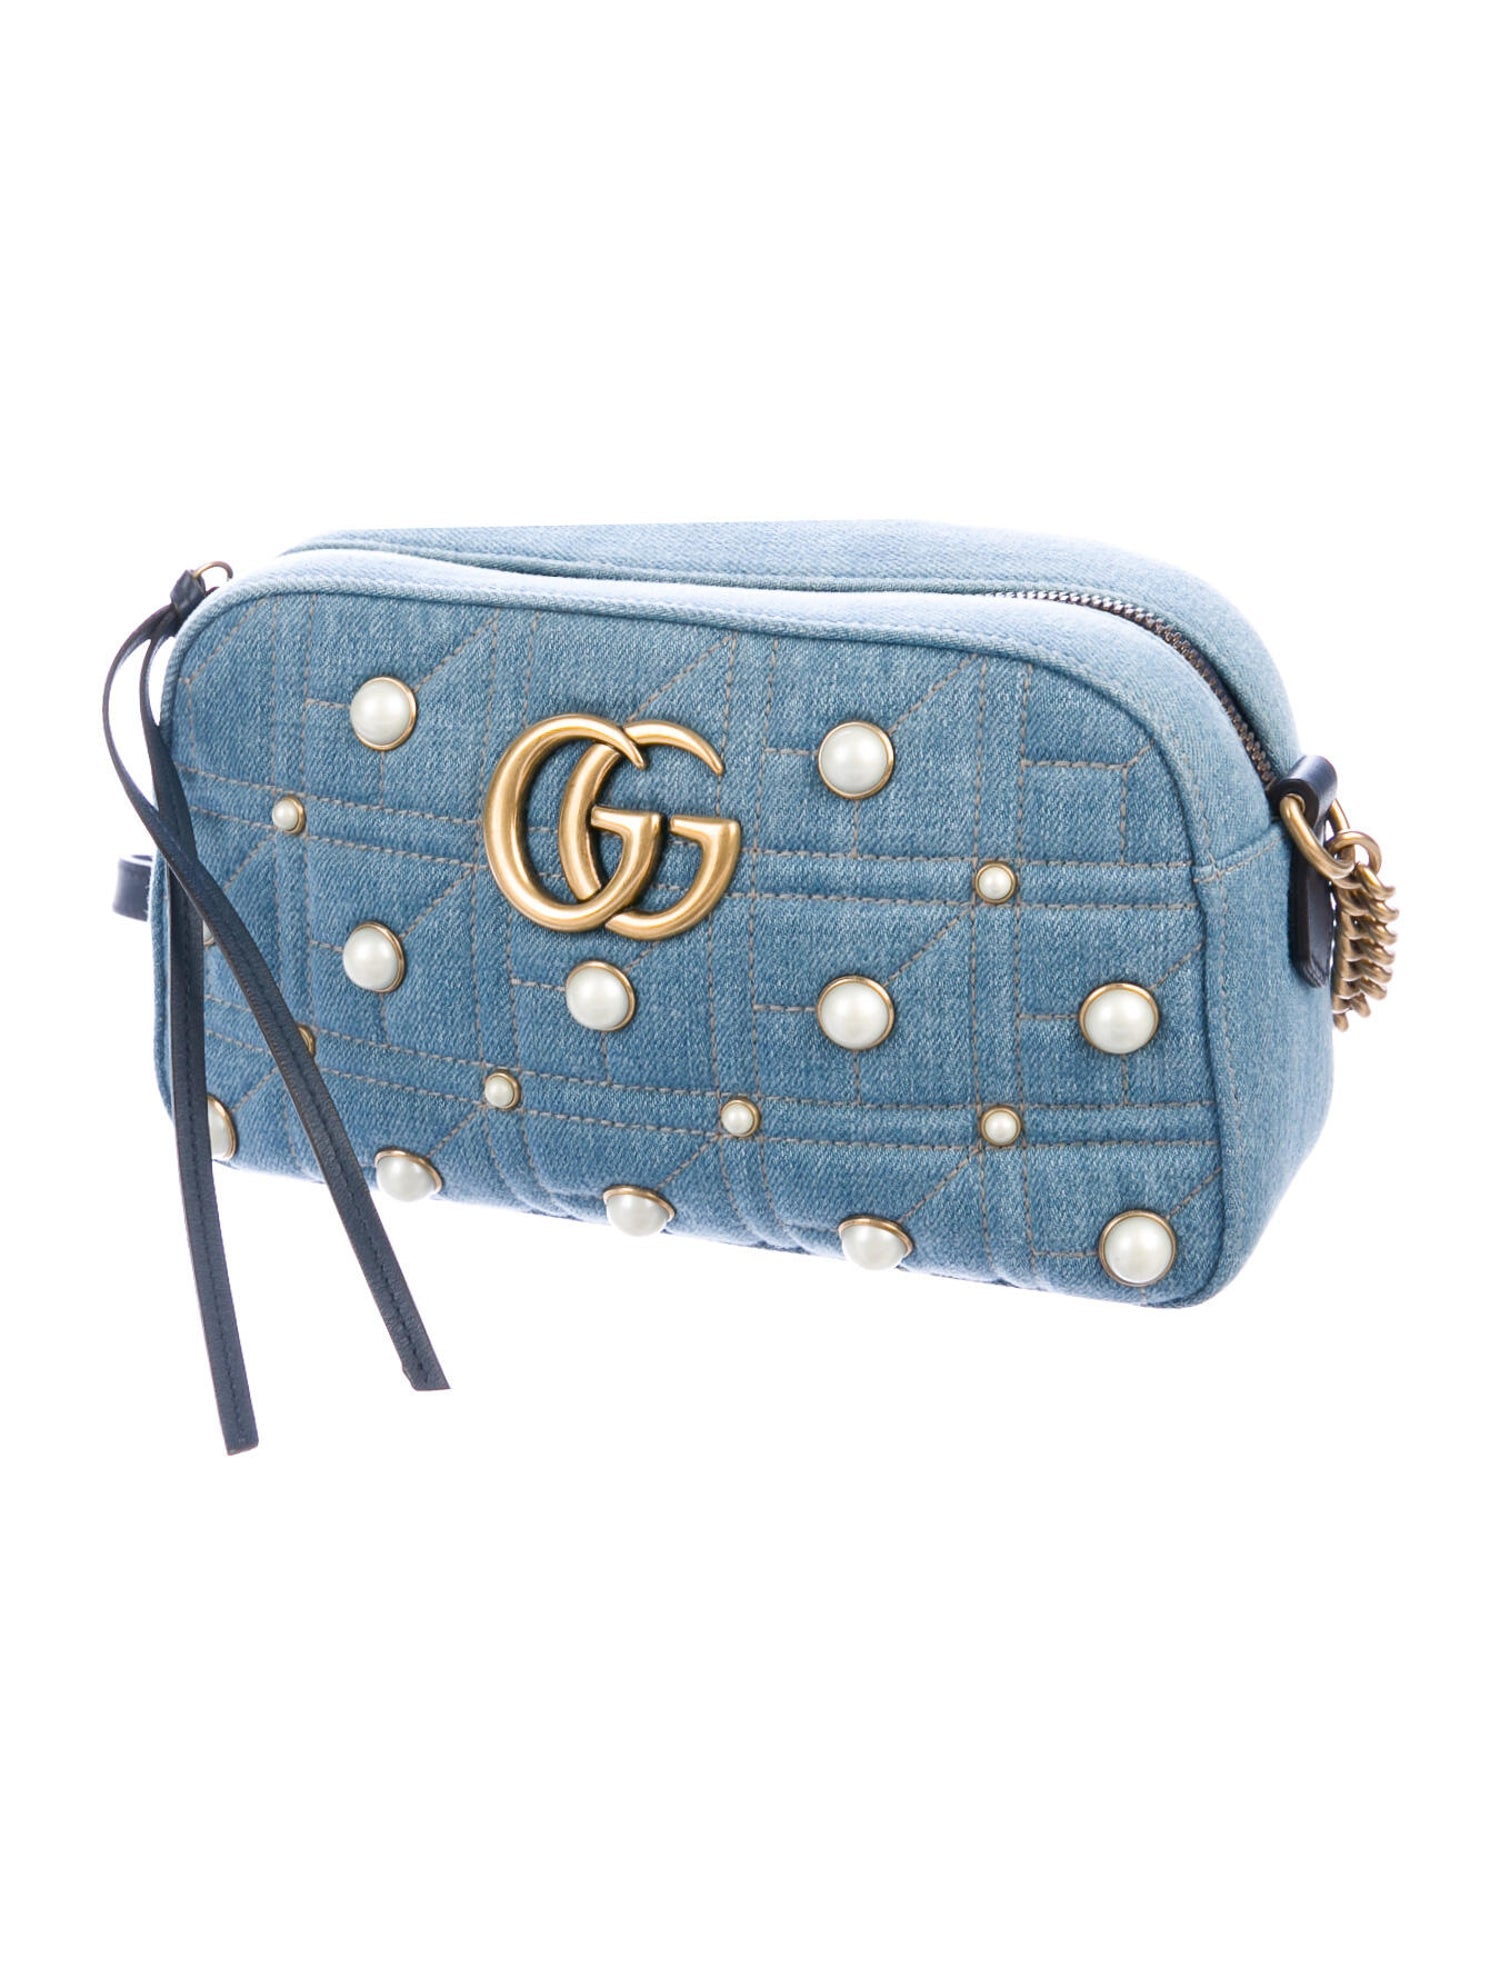 GUCCI Denim Matelasse Small Pearly GG Marmont Shoulder Bag Blue 1312412